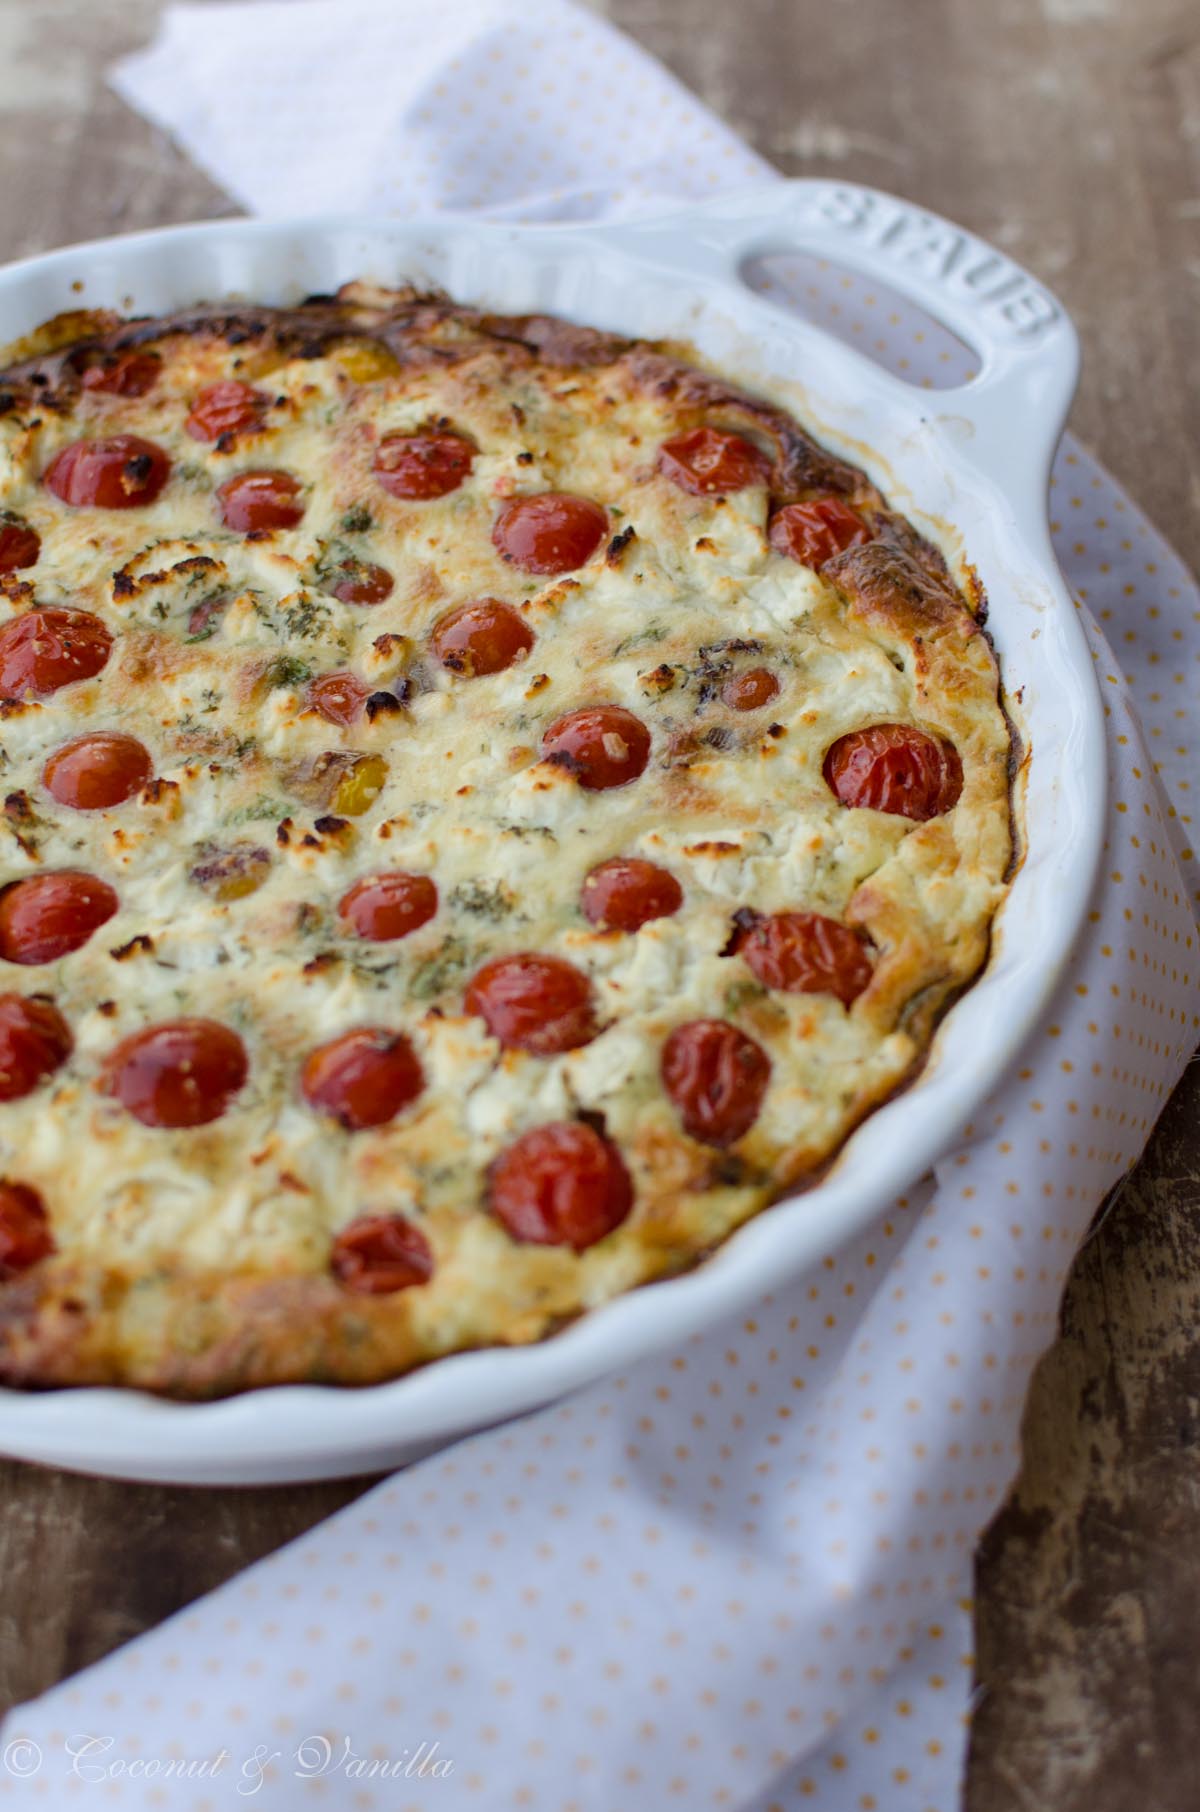 Caramelized cherry tomato, zucchini and goat cheese clafoutis